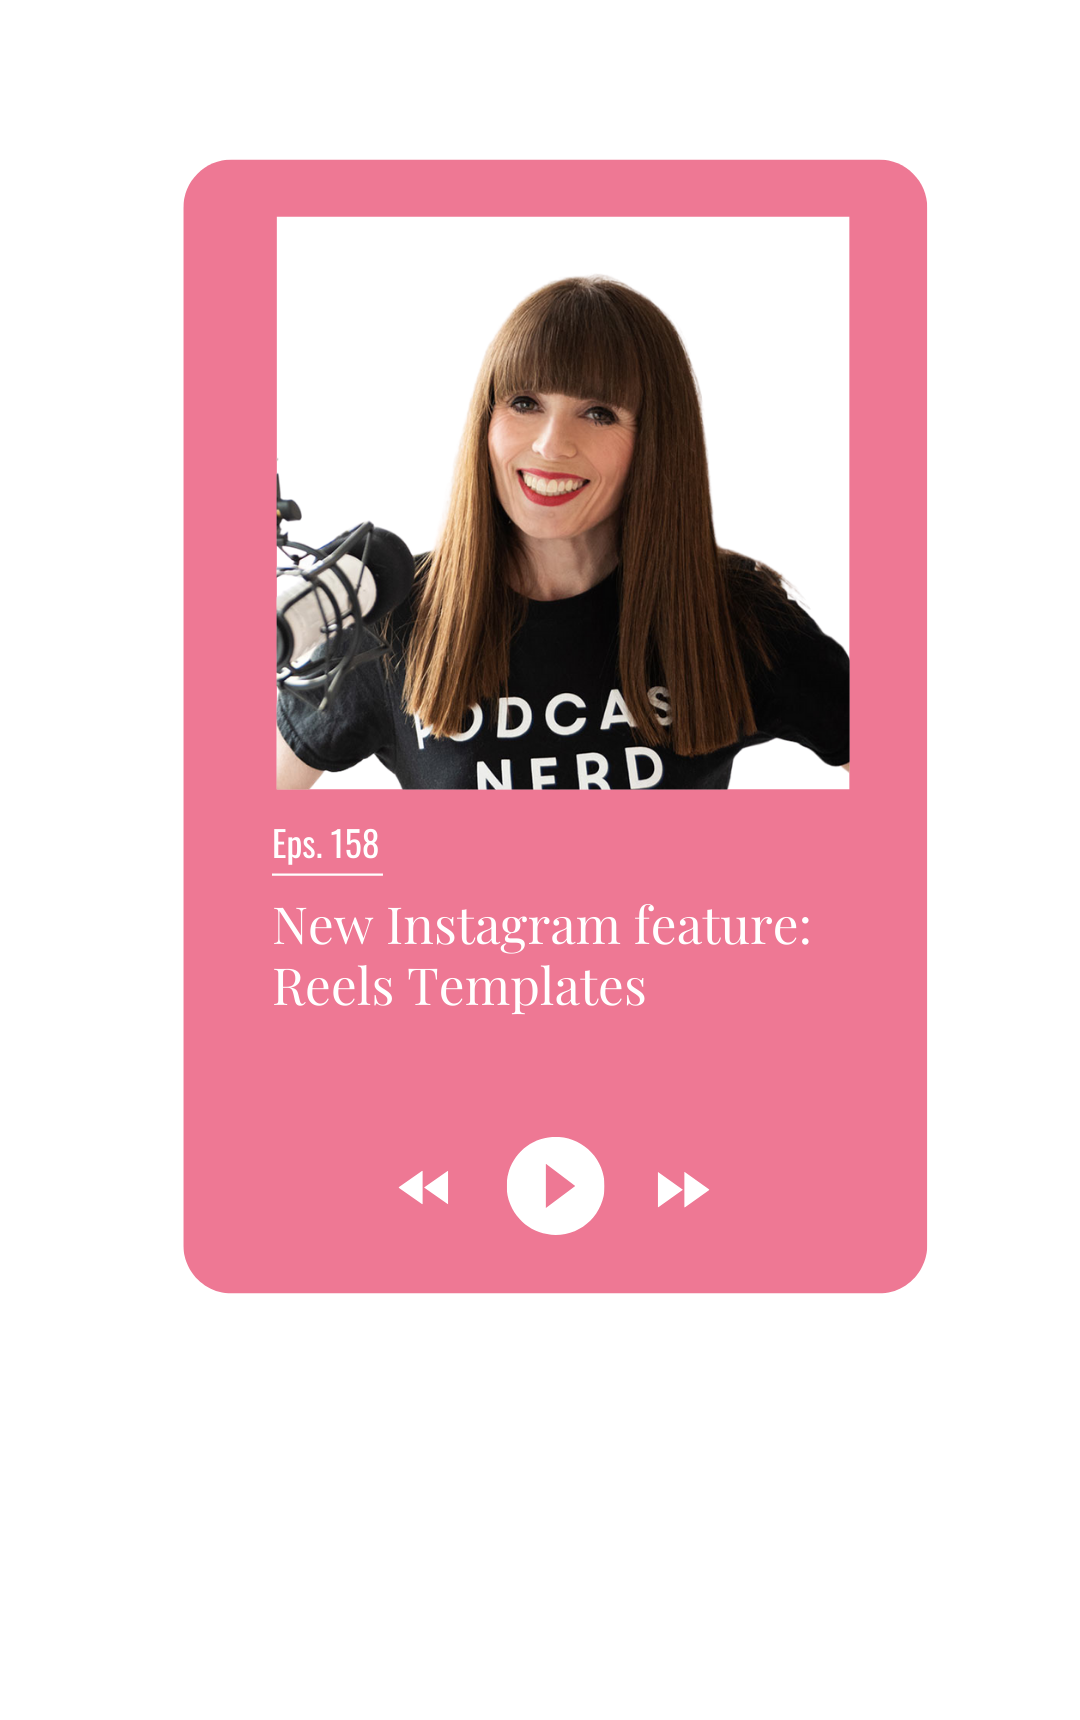 New Instagram feature: Reels Templates